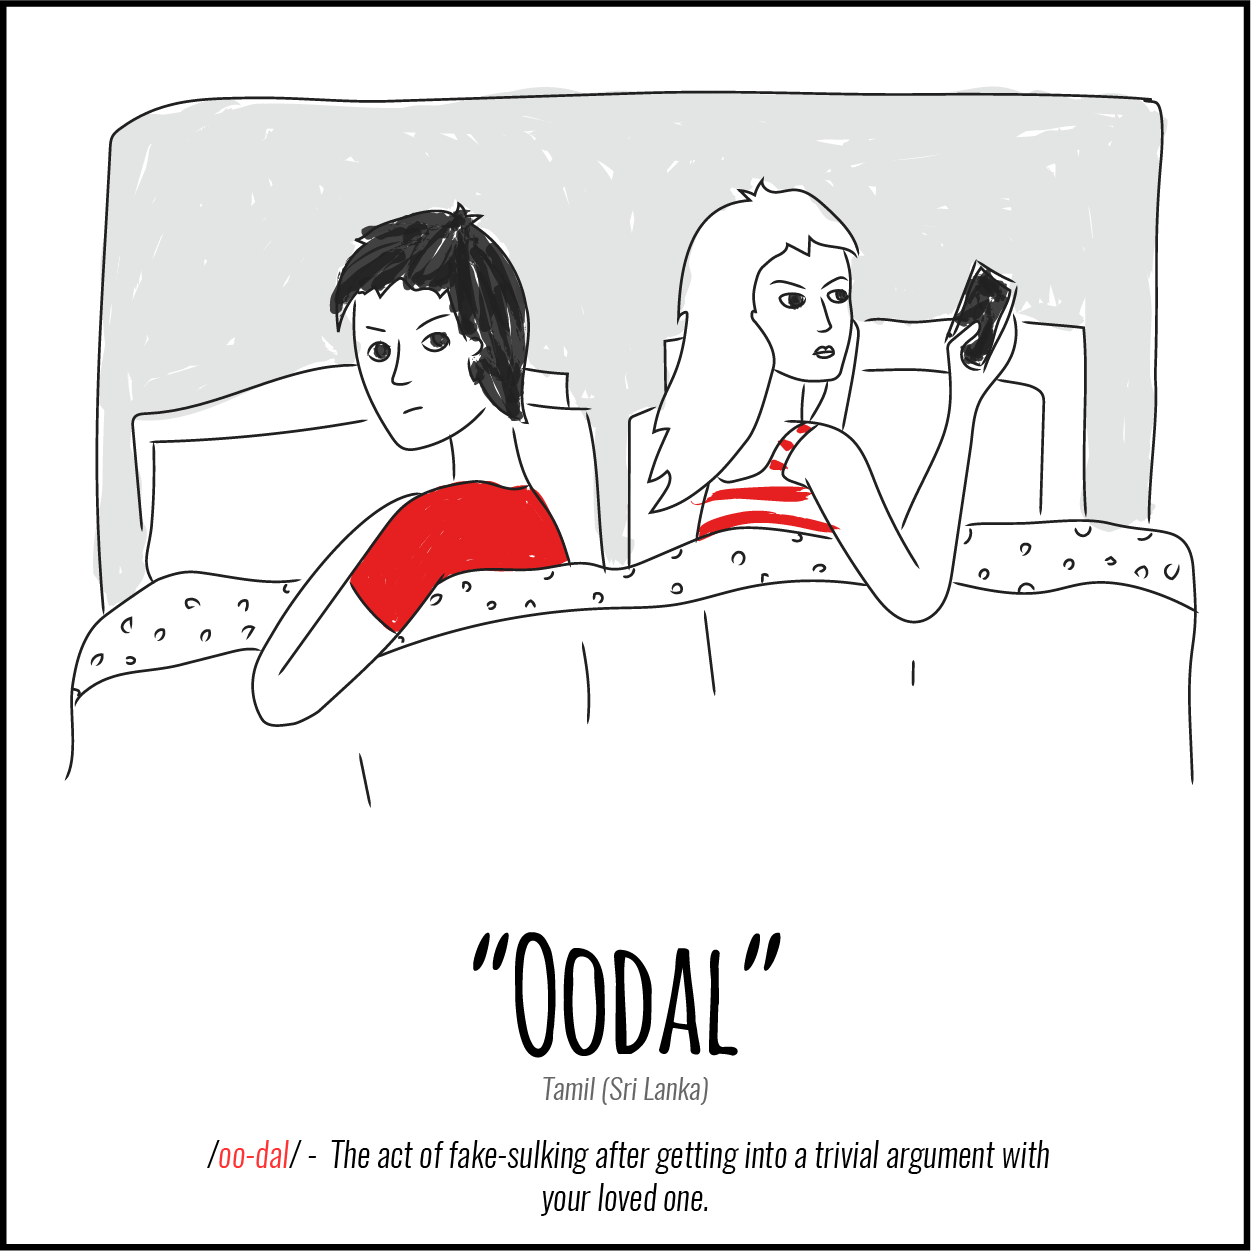 Illustration: Untranslatable Words about love, Oodal, Tamil (Sri Lanka) The act of fake-sulking after getting into a trivial argument with your loved one